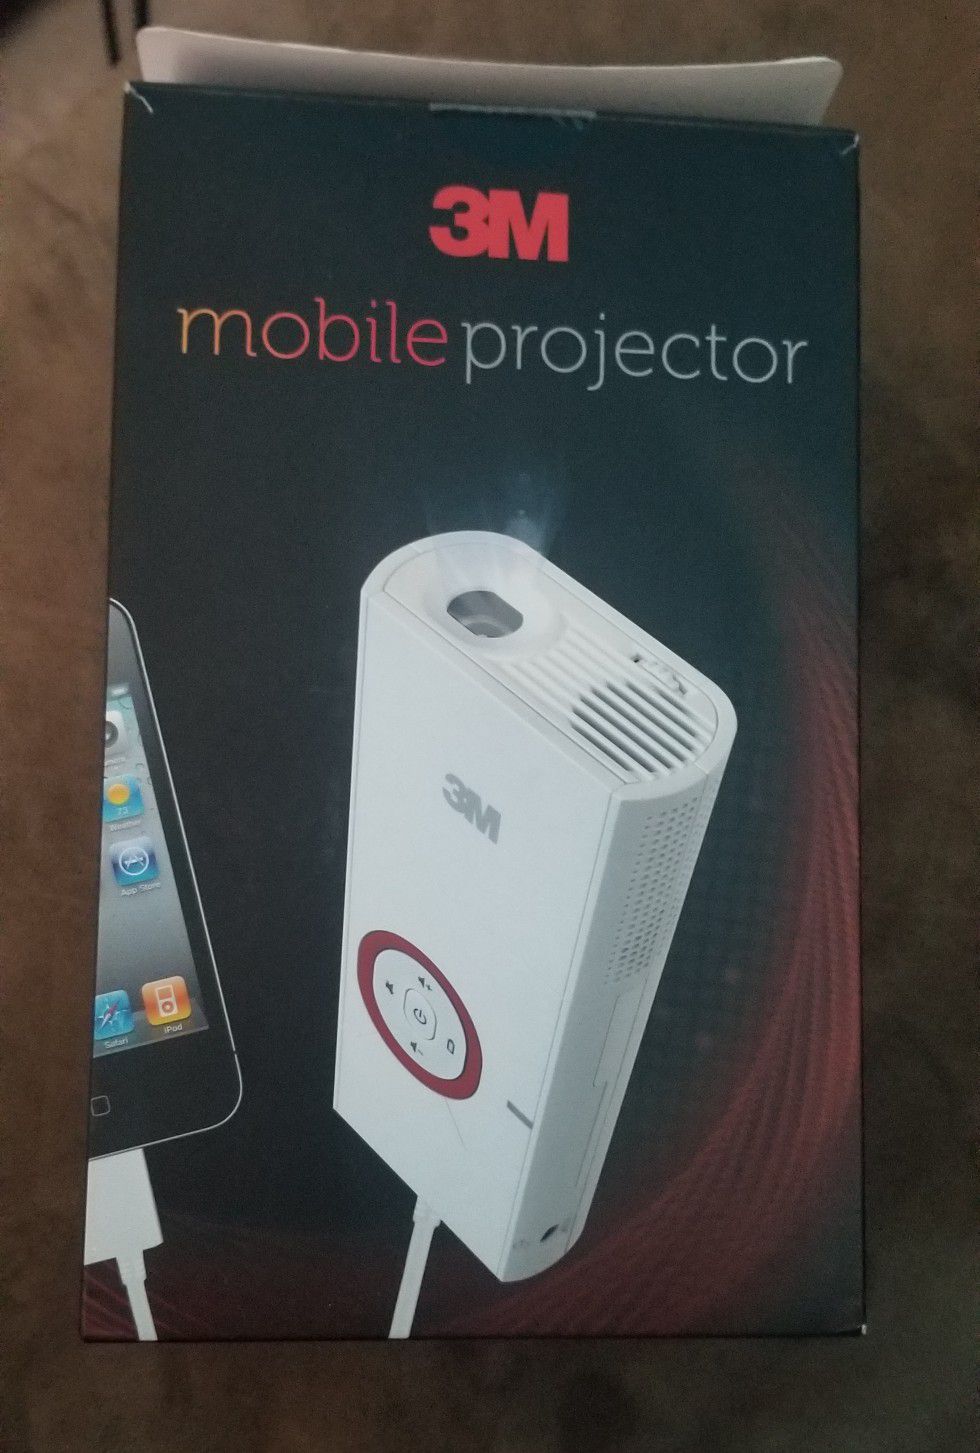 3M mobile projector